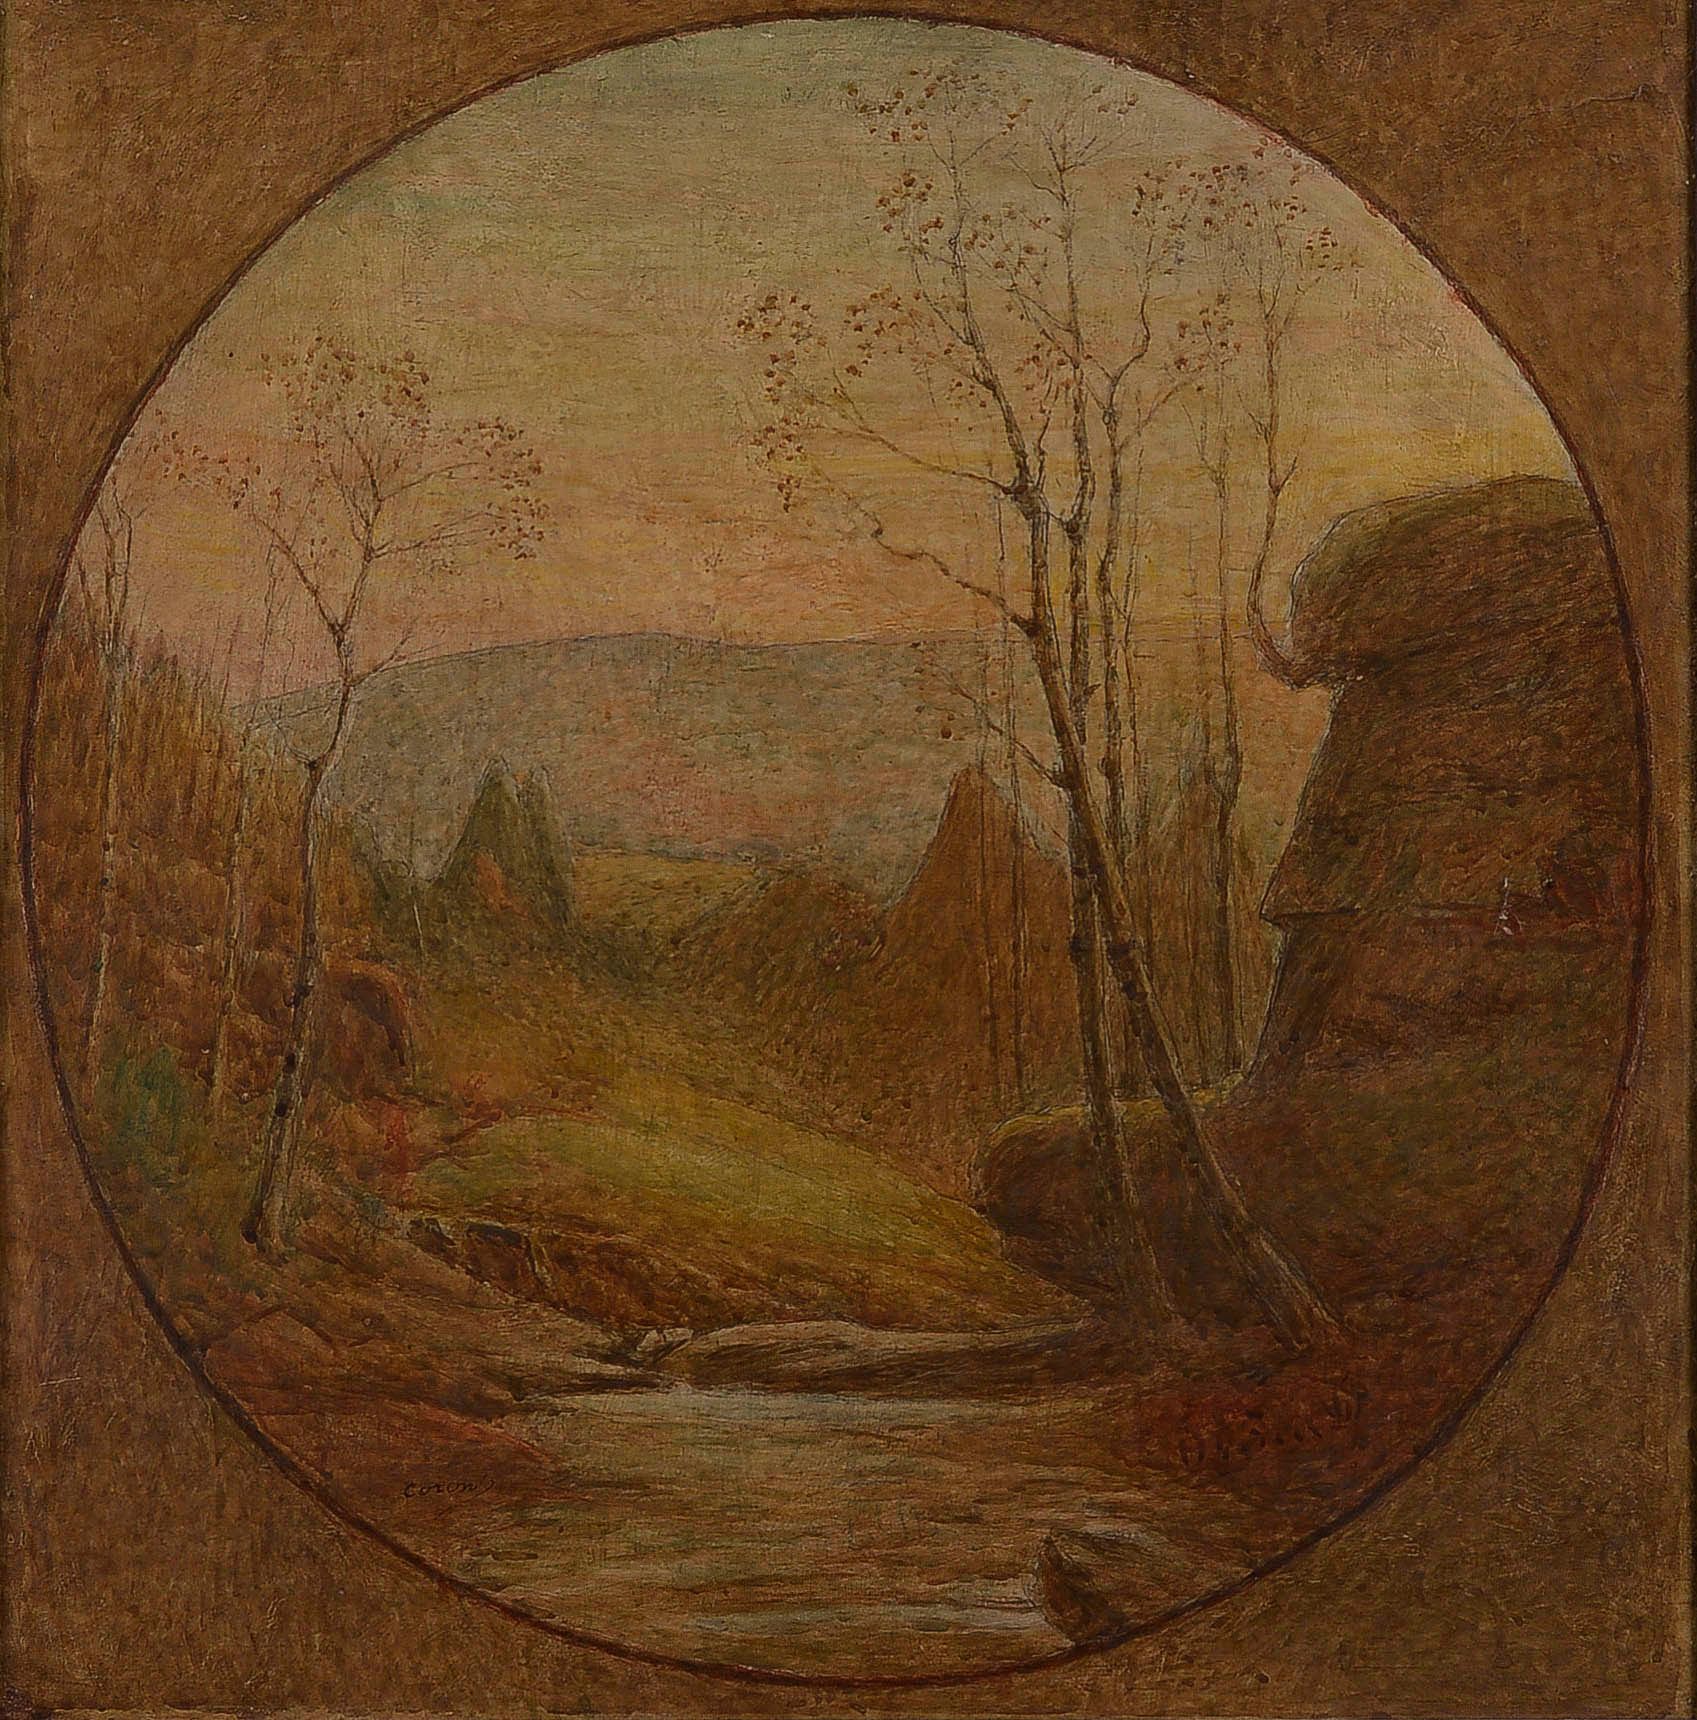 Null Joseph CORONT (1859-1934)

Landscape with millstones

Oil on canvas with ci&hellip;